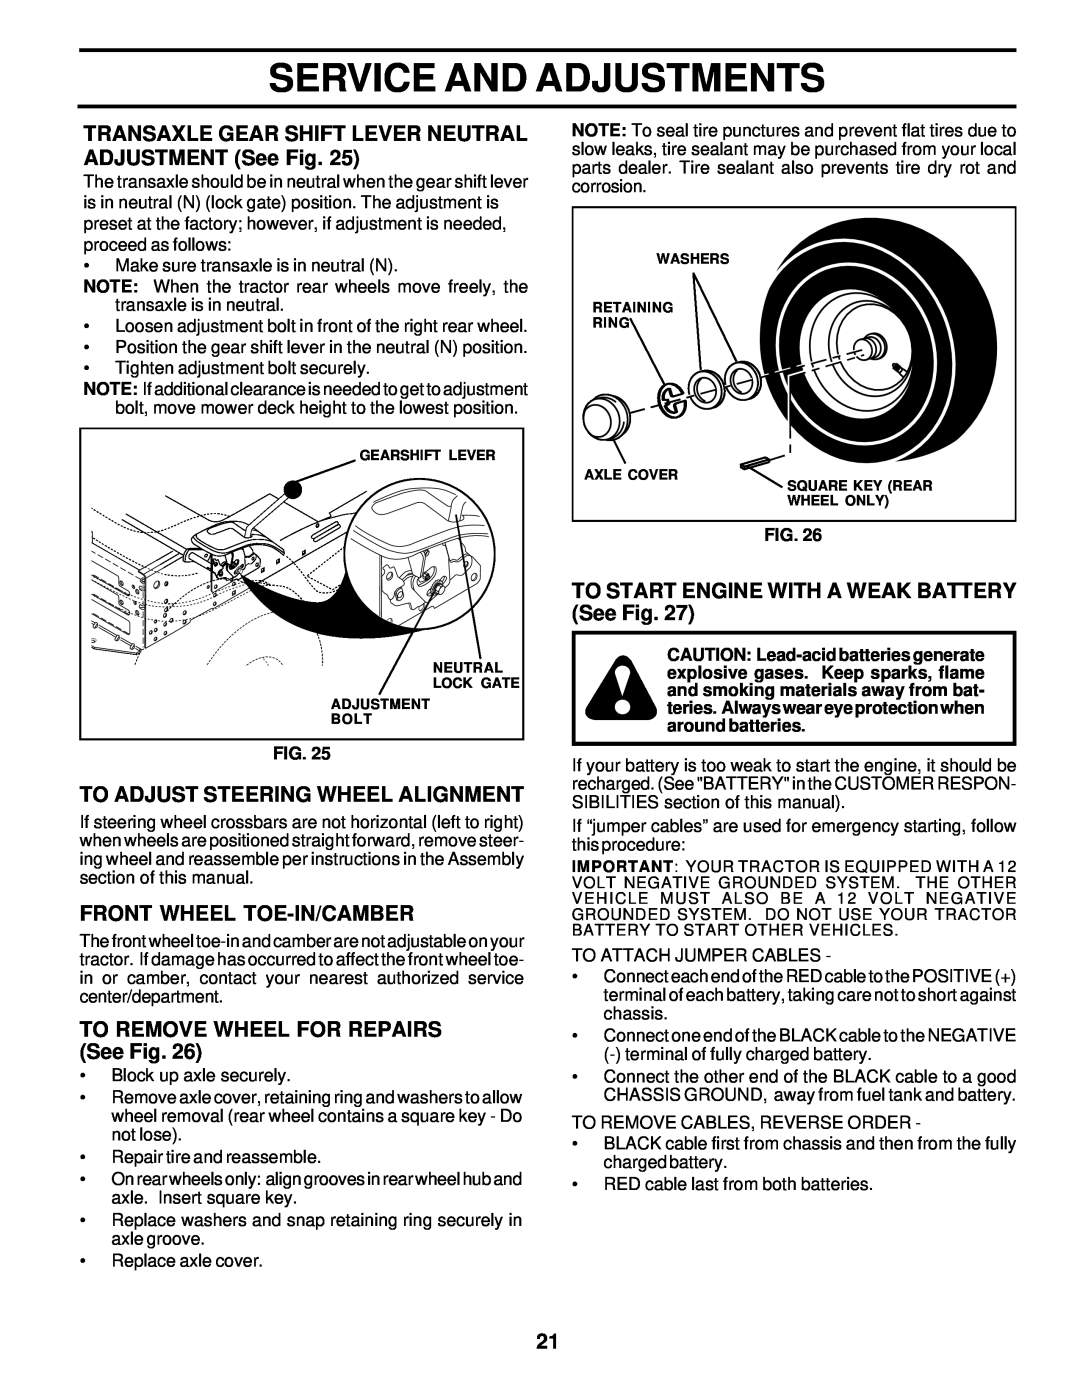 Poulan 178108 owner manual TRANSAXLE GEAR SHIFT LEVER NEUTRAL ADJUSTMENT See Fig, To Adjust Steering Wheel Alignment 